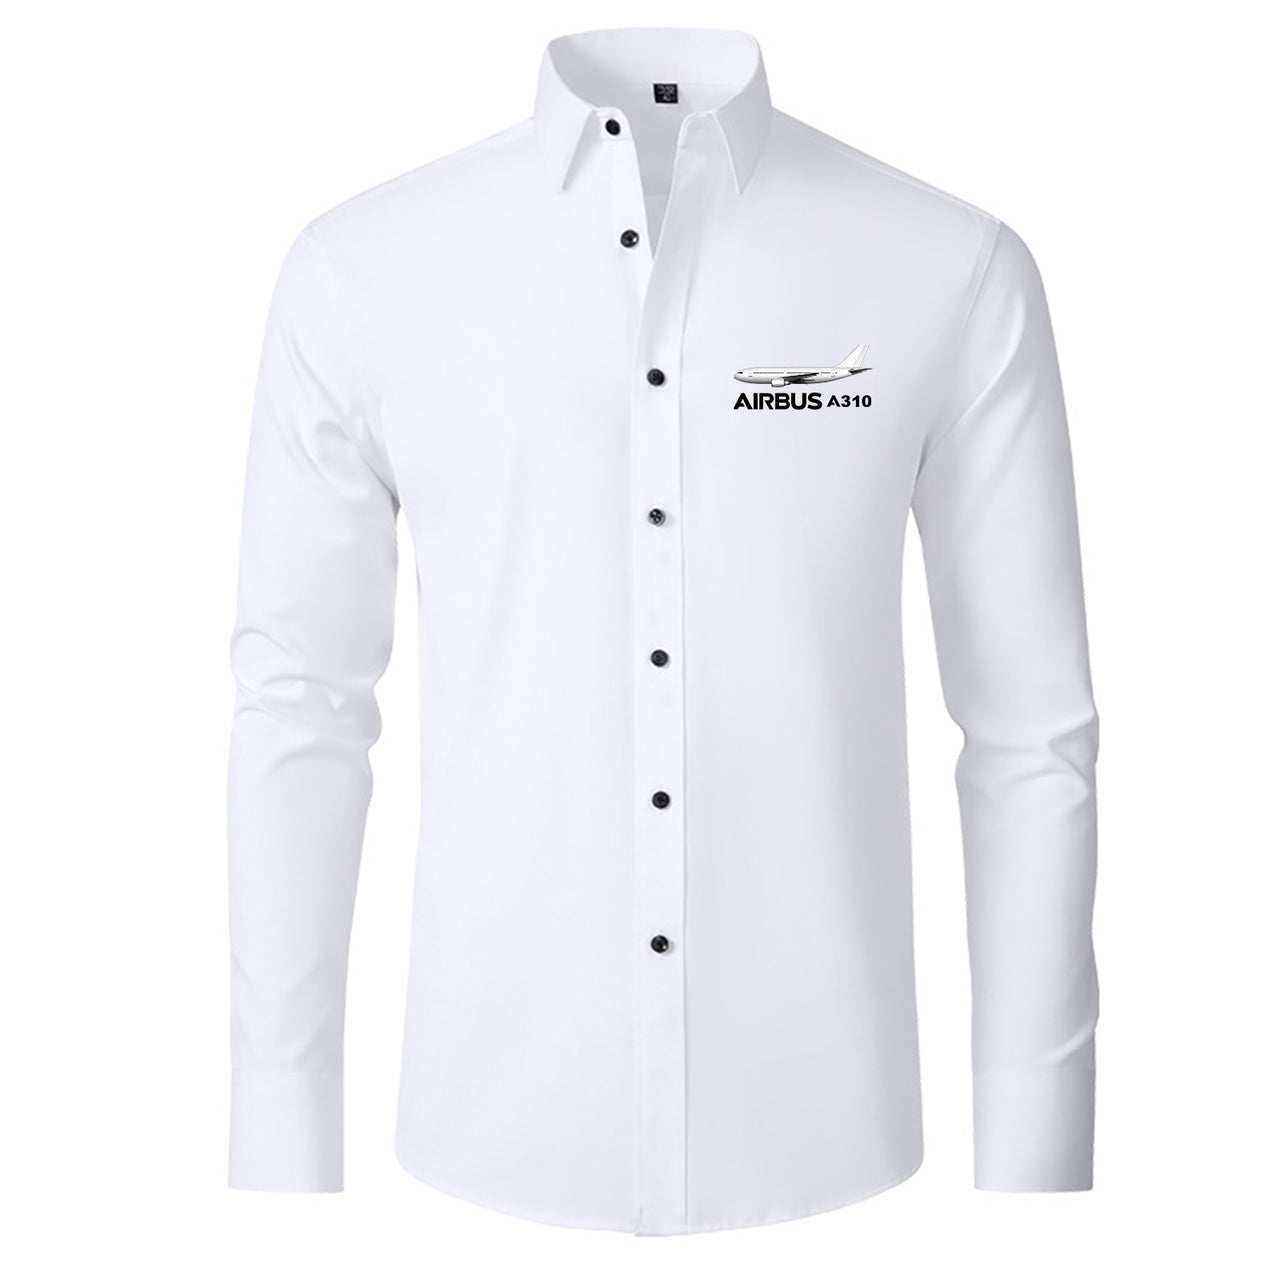 The Airbus A310 Designed Long Sleeve Shirts